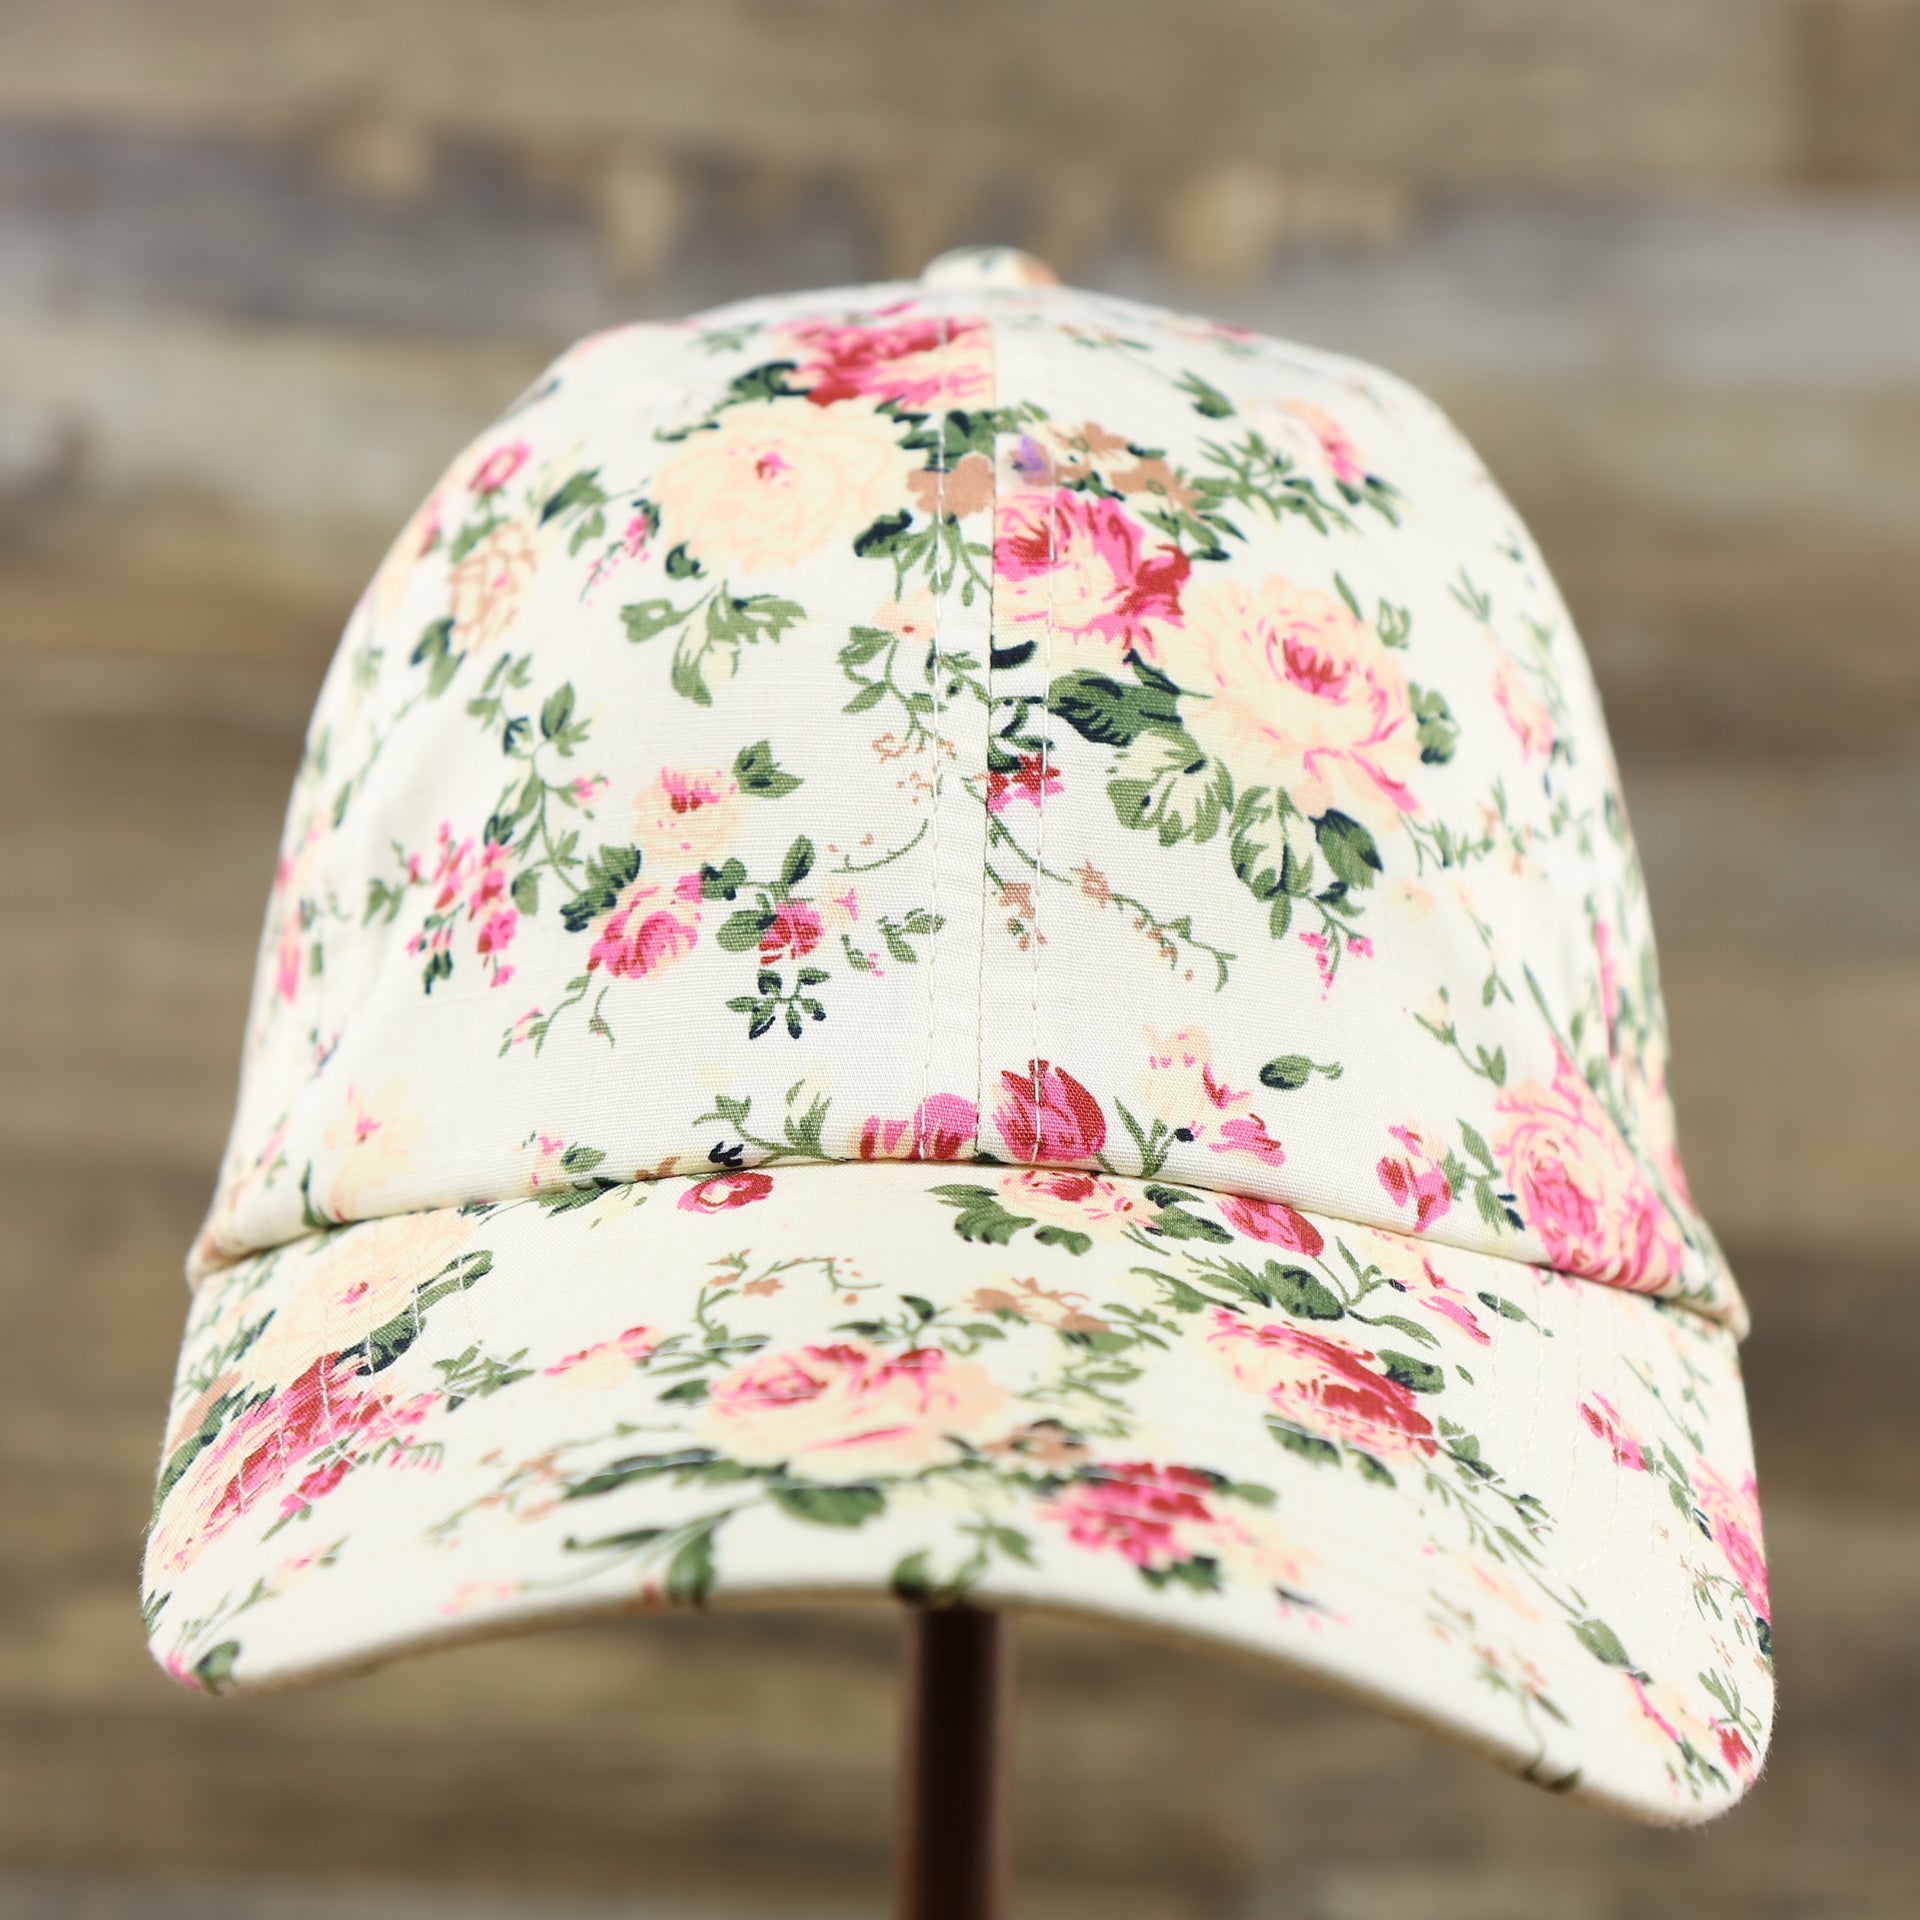 The front of the Floral Print Blank Adjustable Baseball Hat | Cream Dad Hat